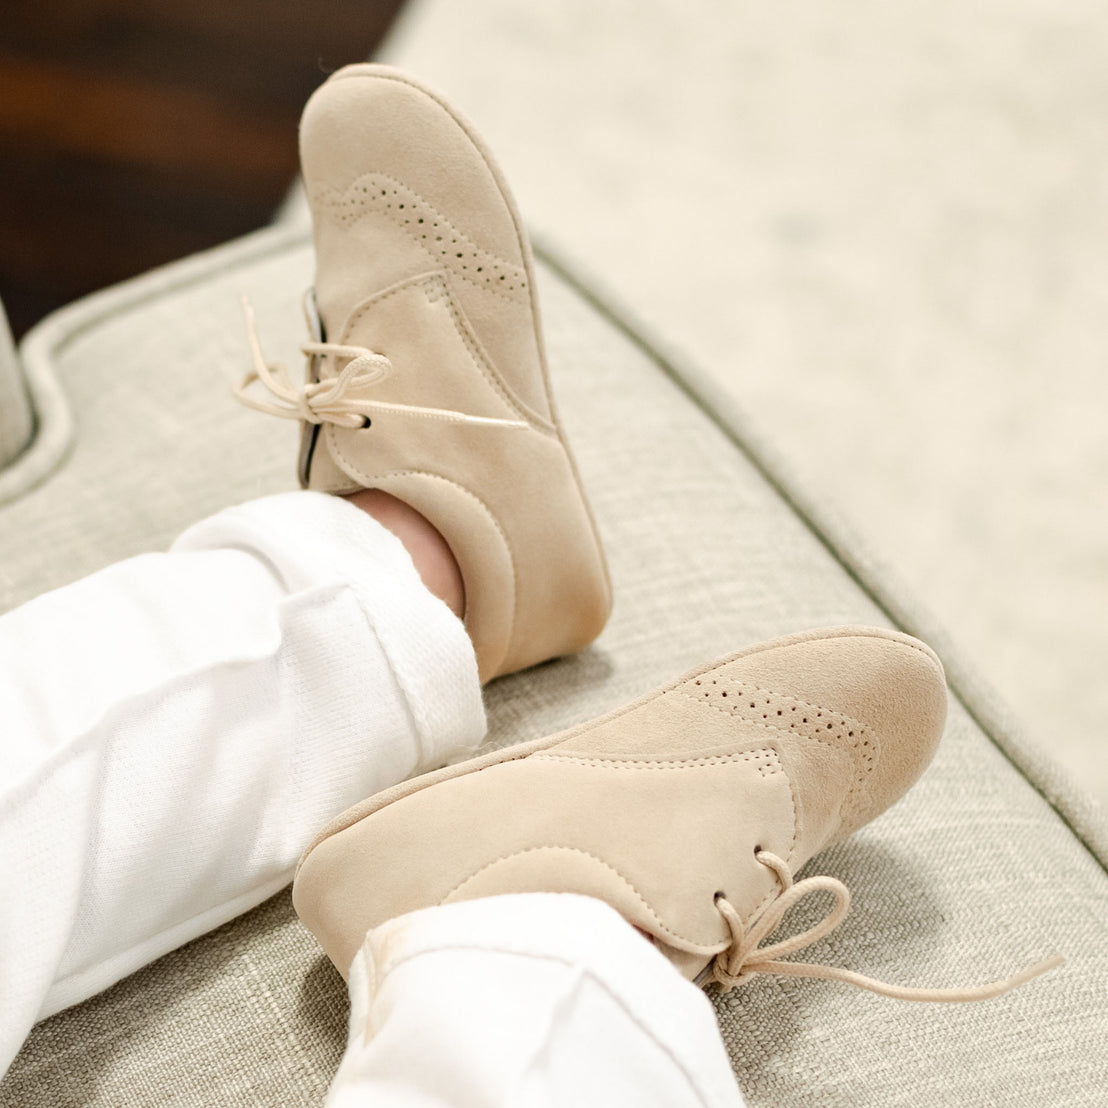 Baby boy wearing the Theodore Suede Shoes in camel (or tan).